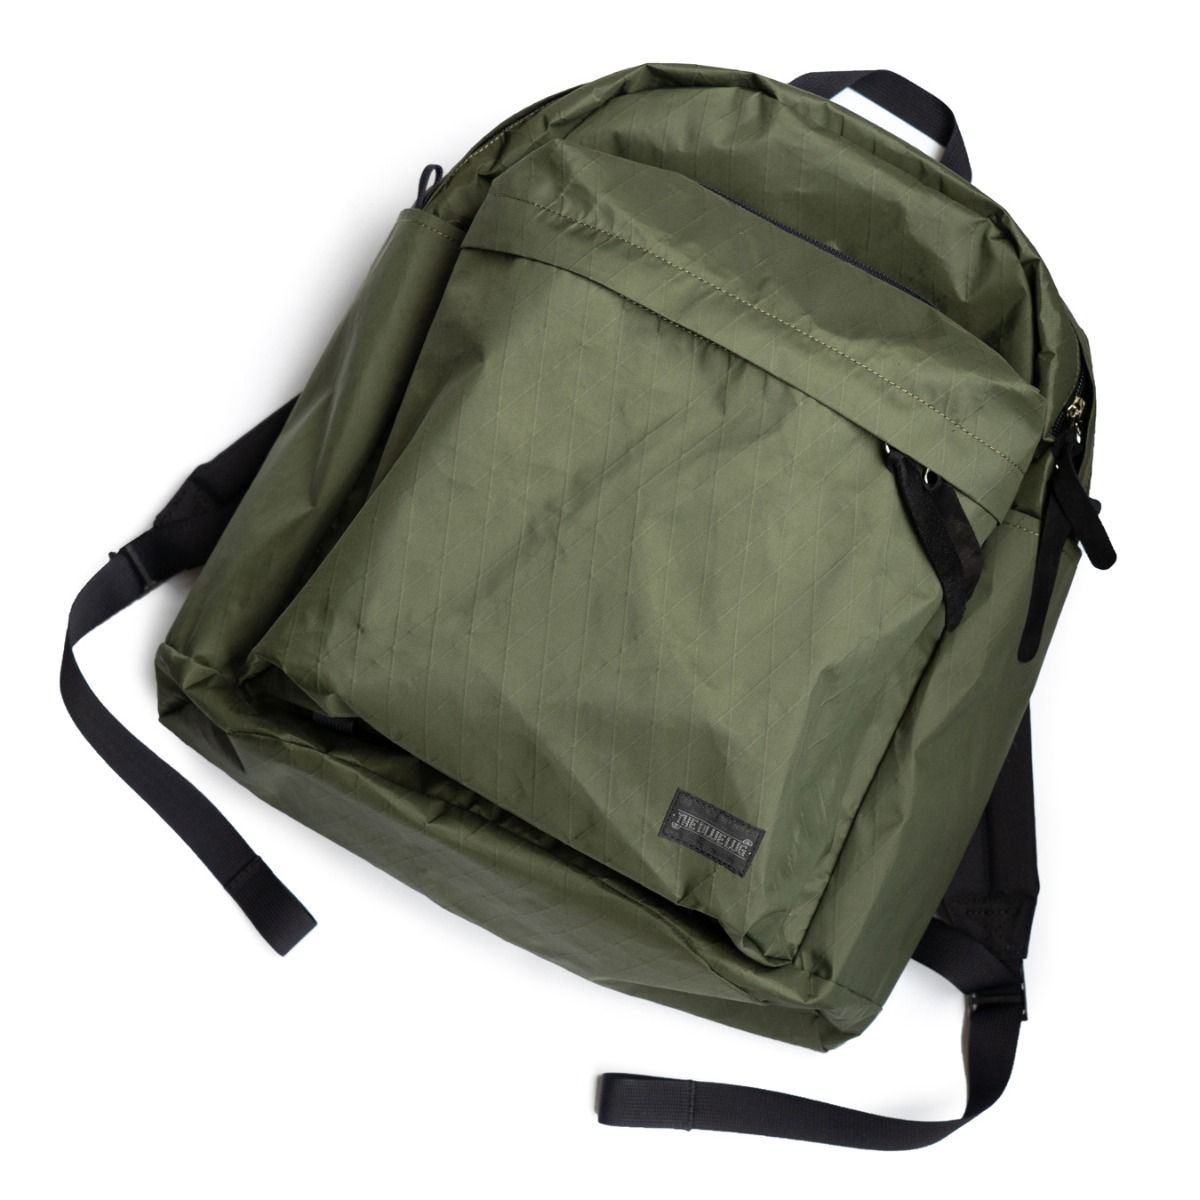 BLUE LUG* THE DAY PACK (x-pac olive) - BLUE LUG ONLINE STORE